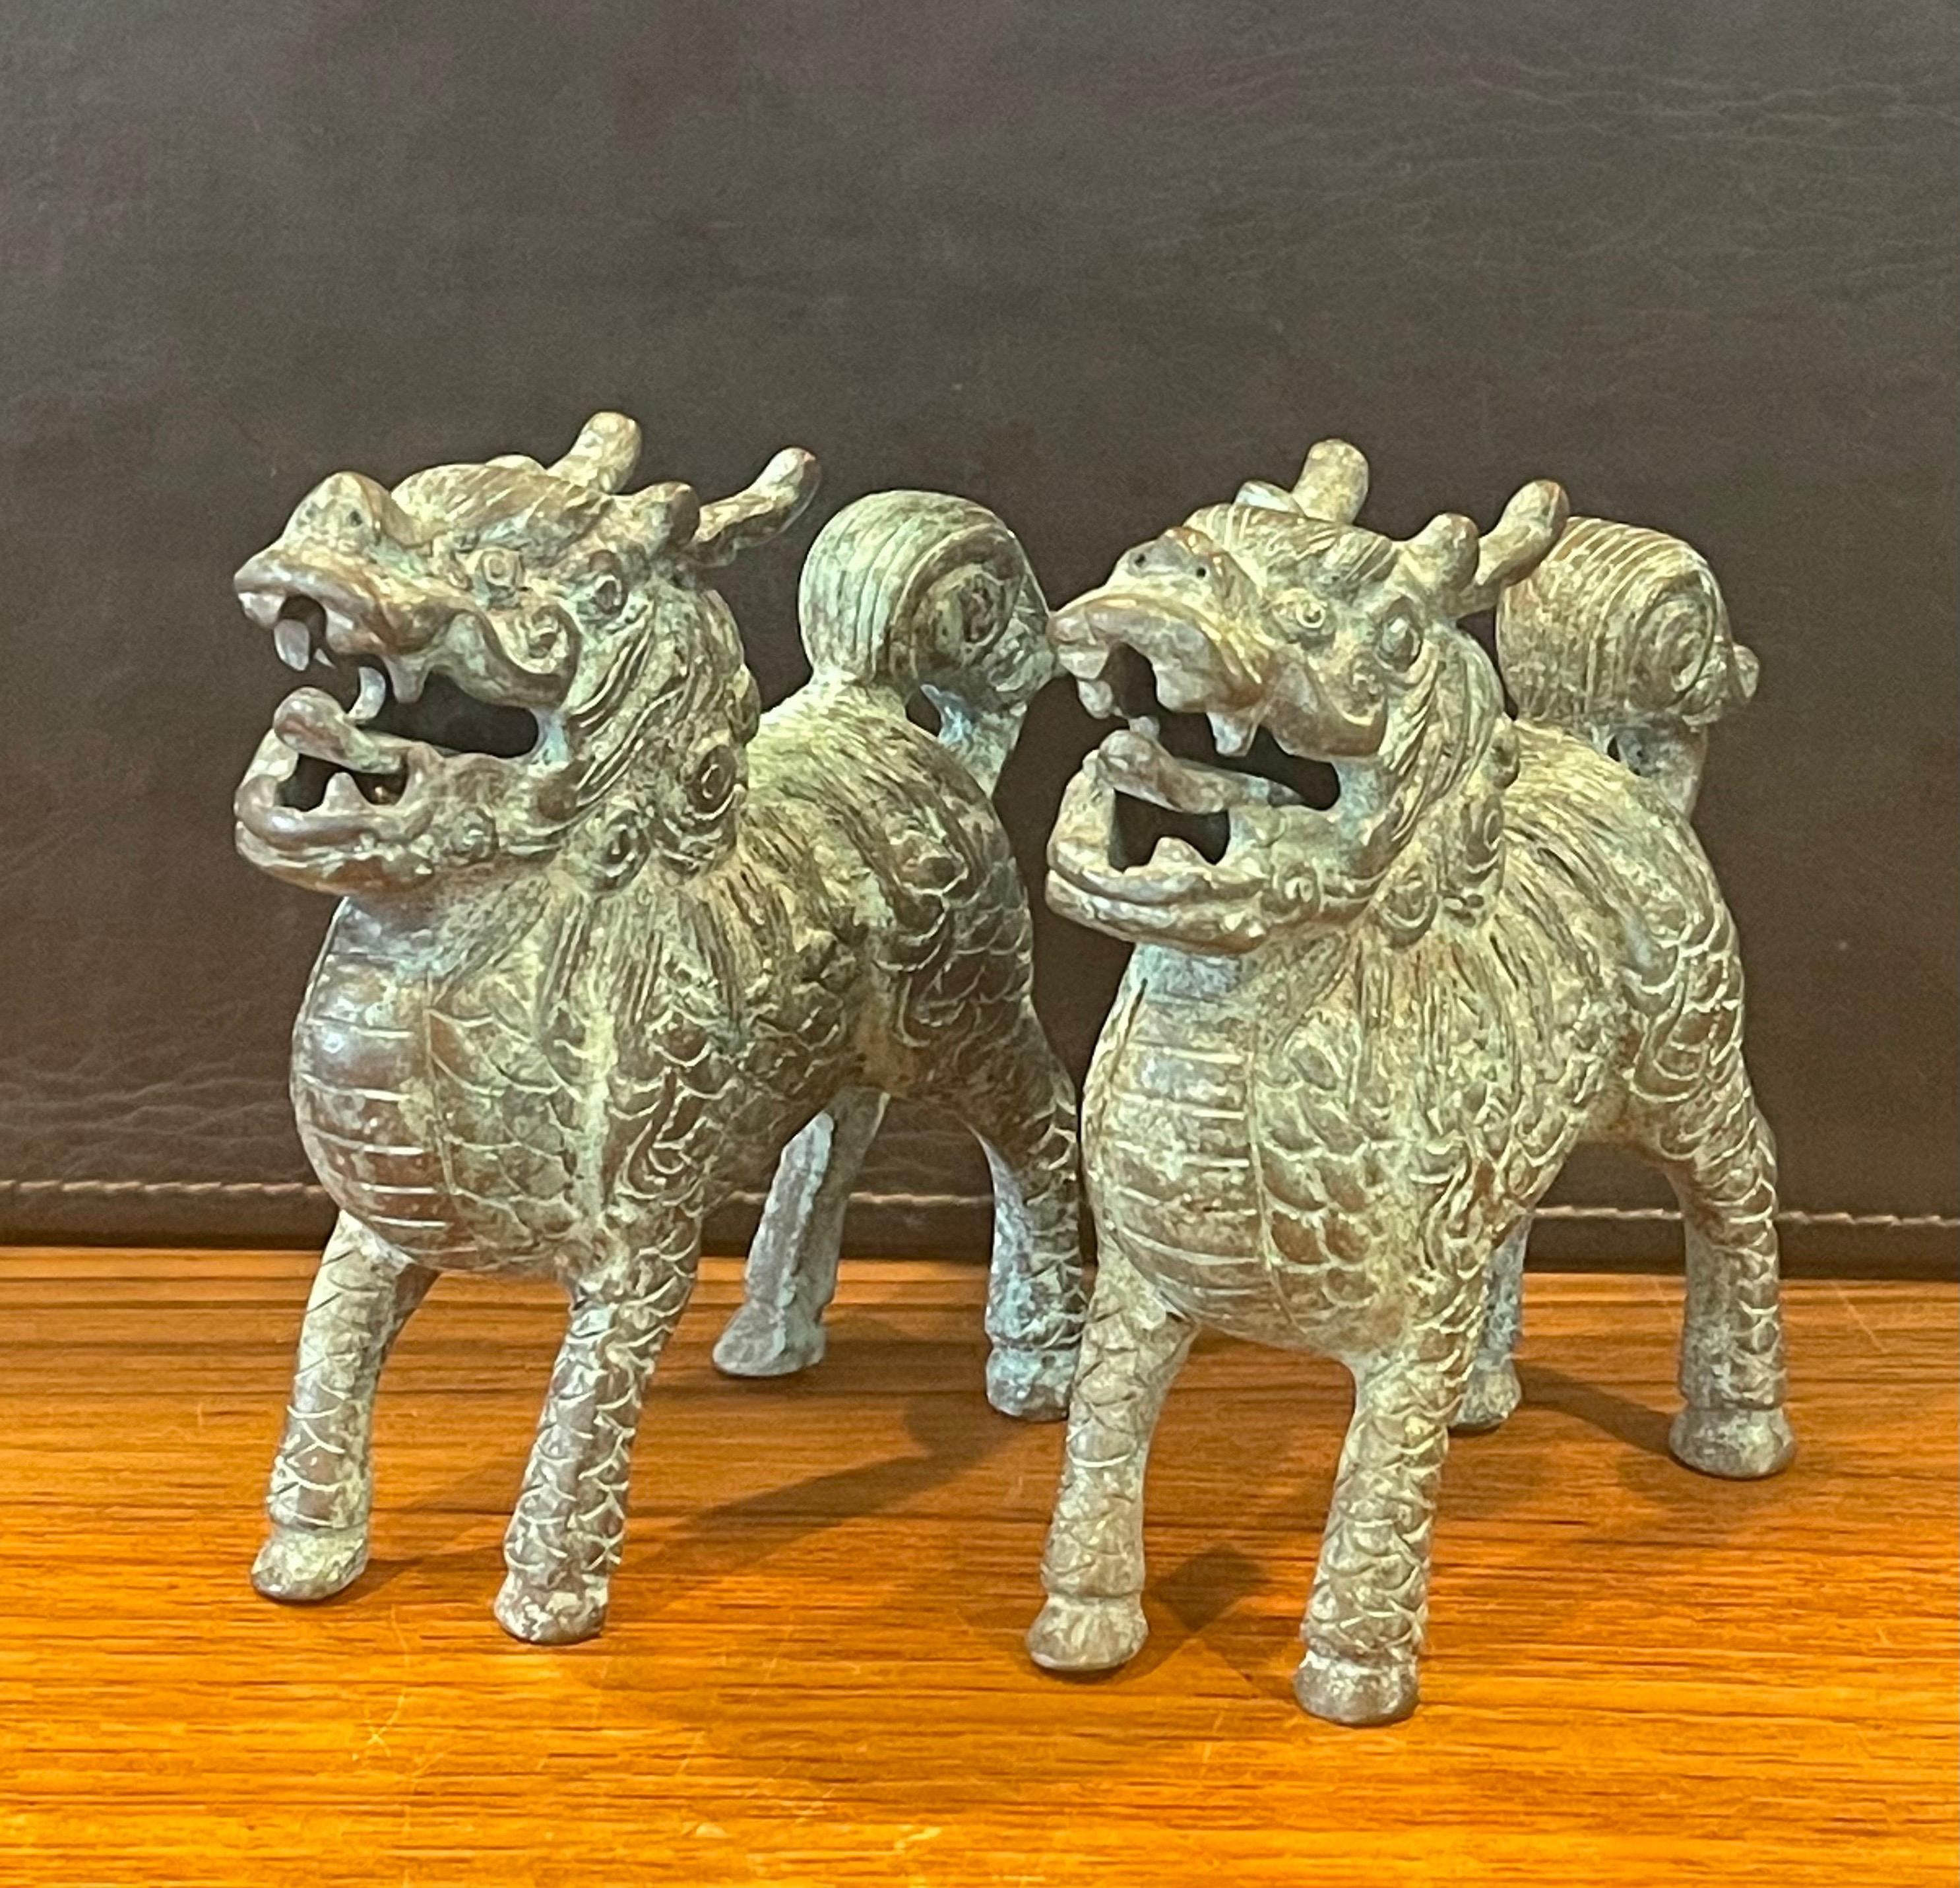 Pair of patinated bronze Chinese foo dogs with a verdigris finish, circa 1980s. The pair are in very good condition with amazing detail and a gorgeous patina. Each dog measures 5.75